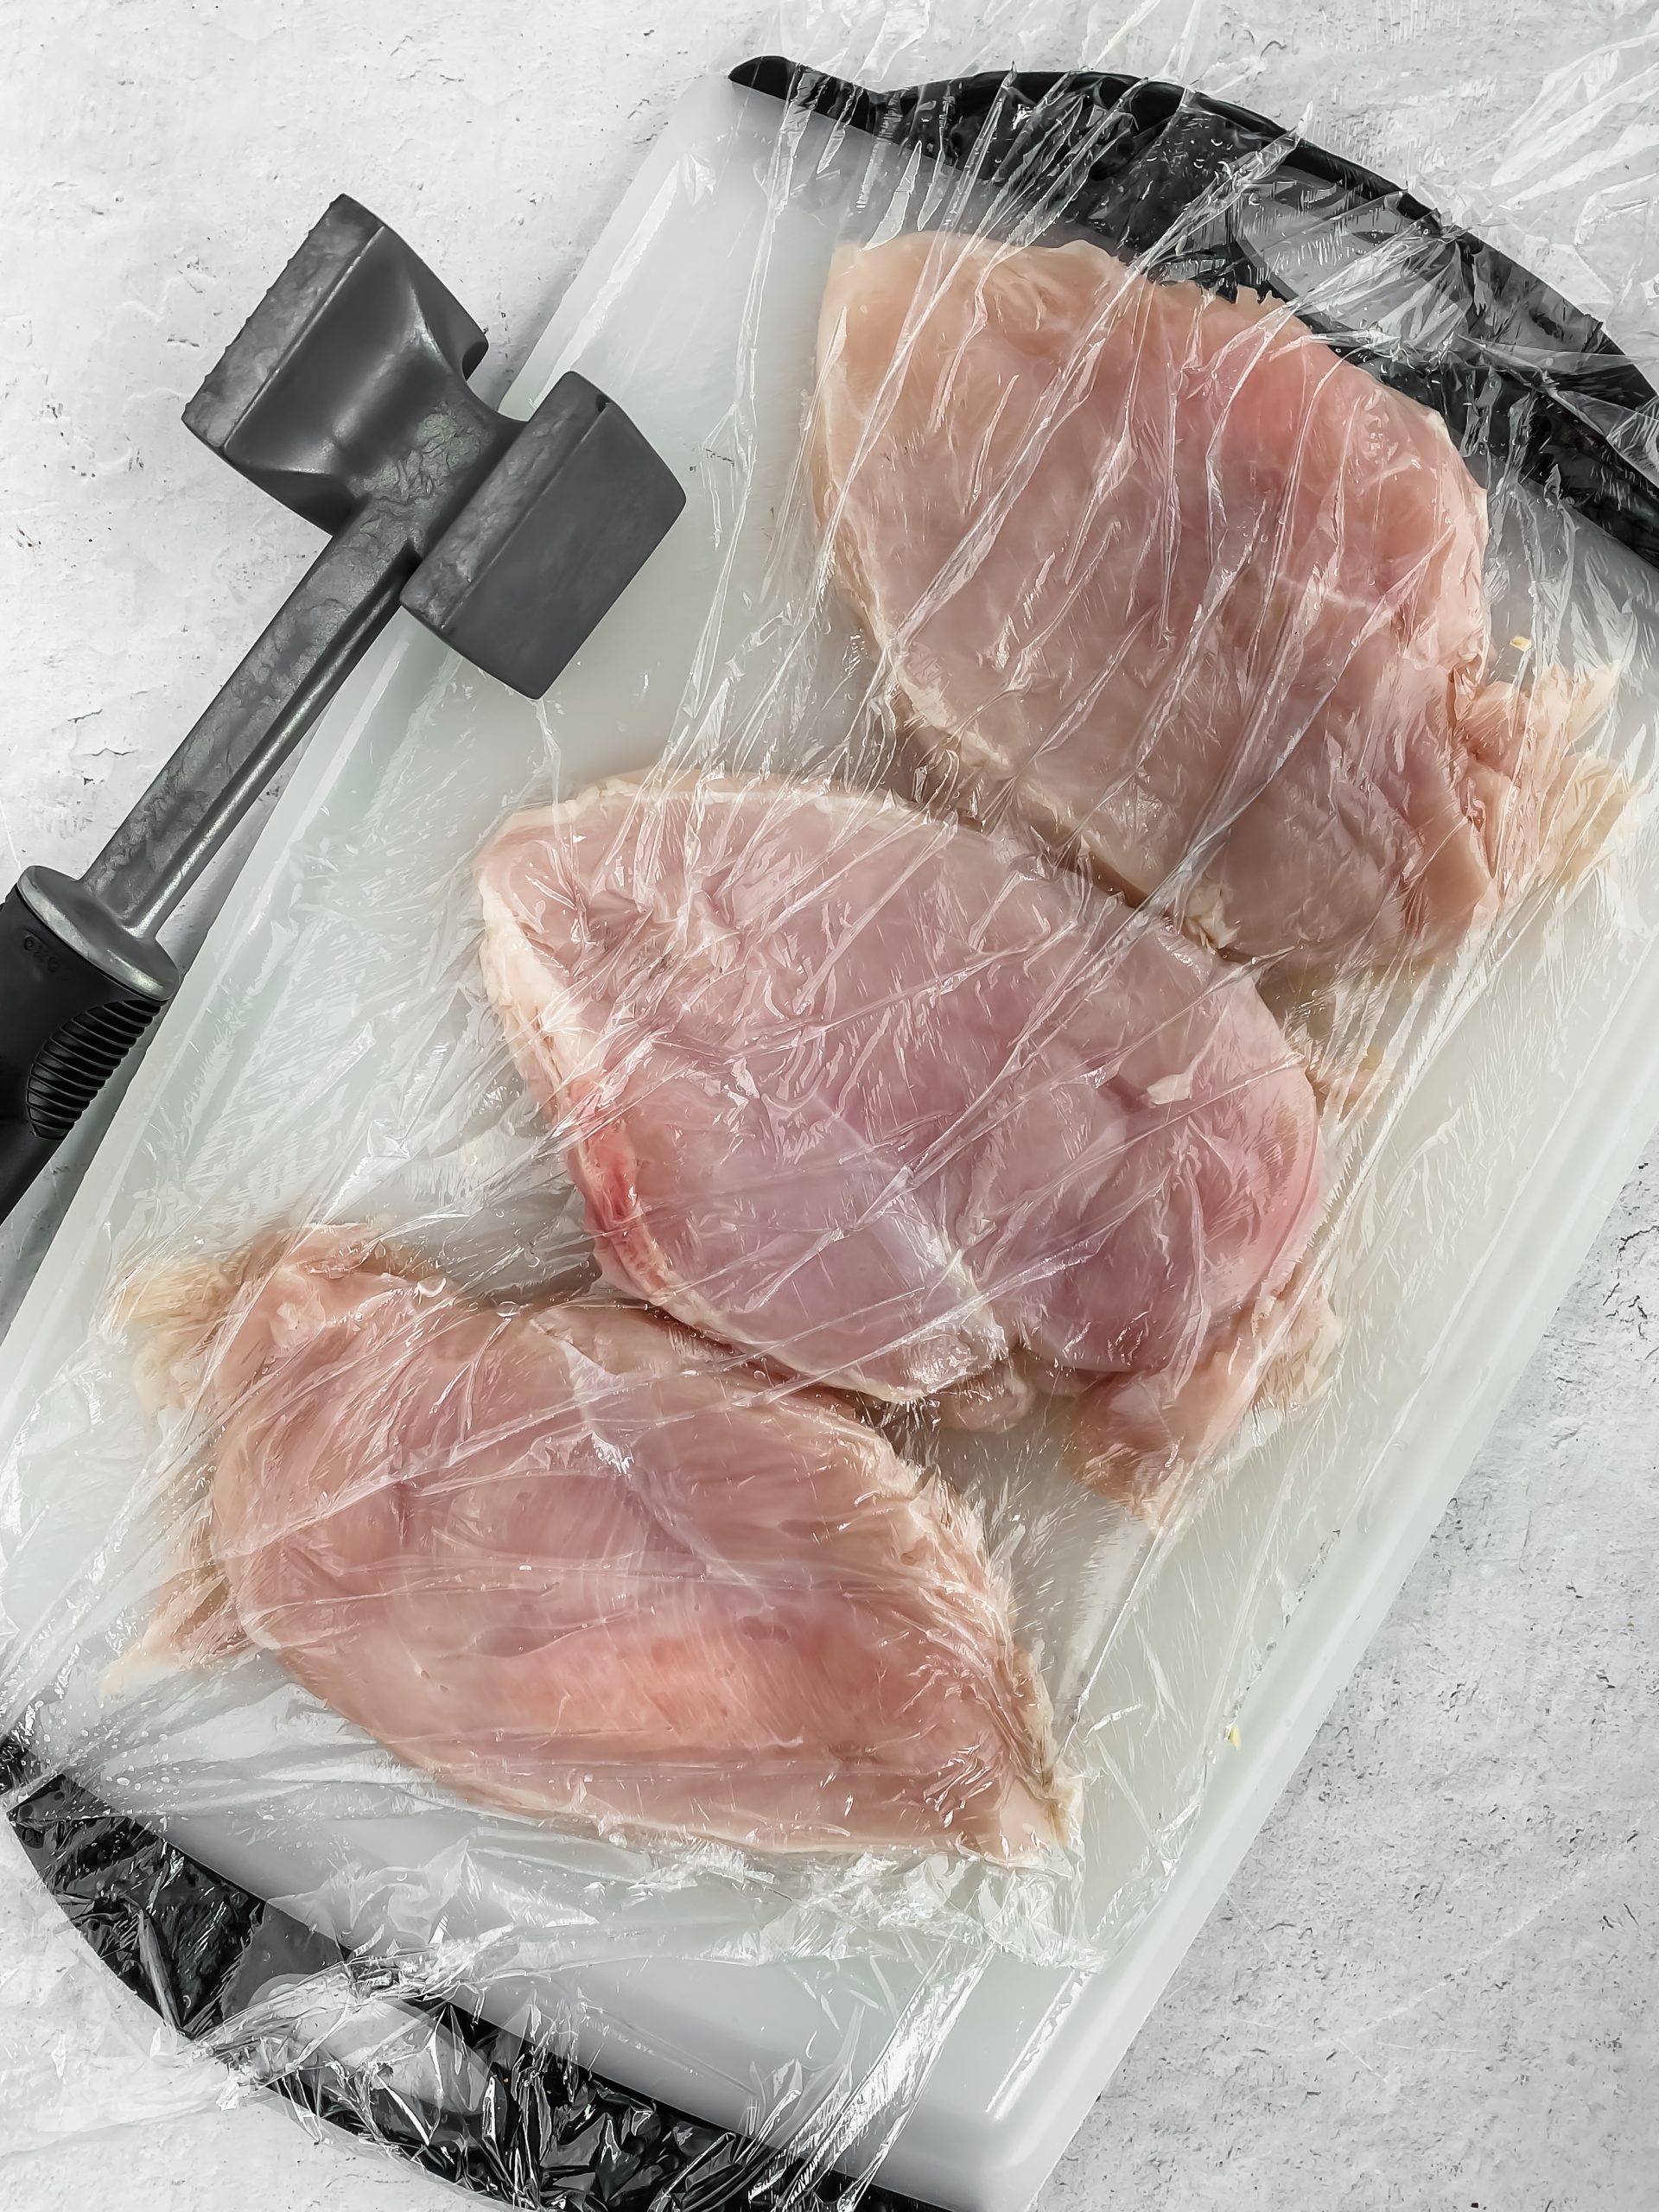 How To Store Chicken Breast In Freezer